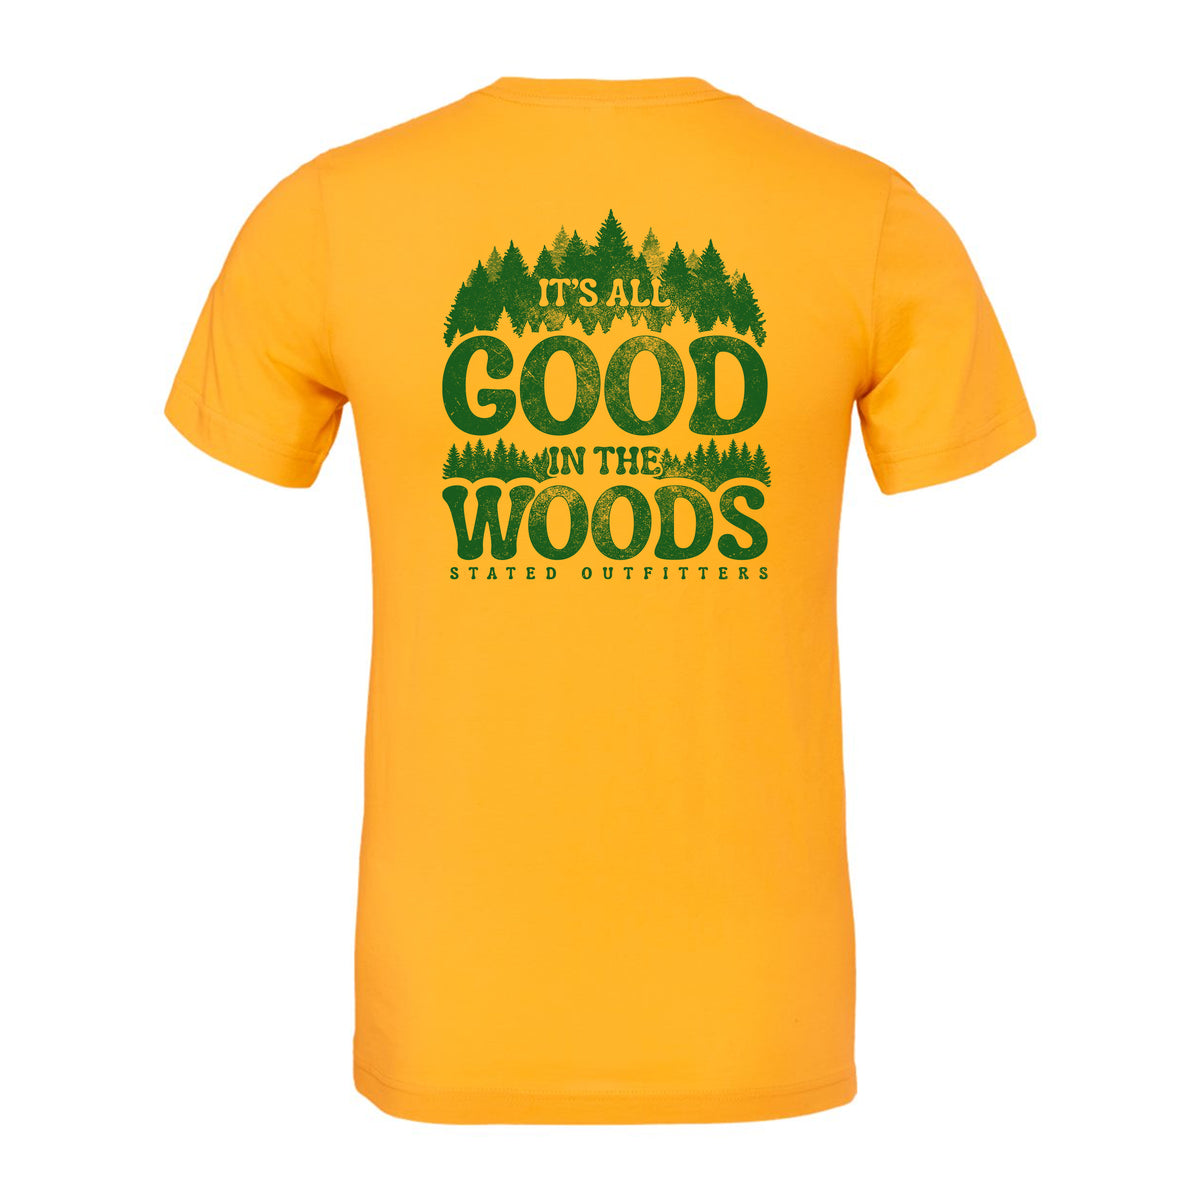 Stated Outfitters All Good In The Woods T-Shirt